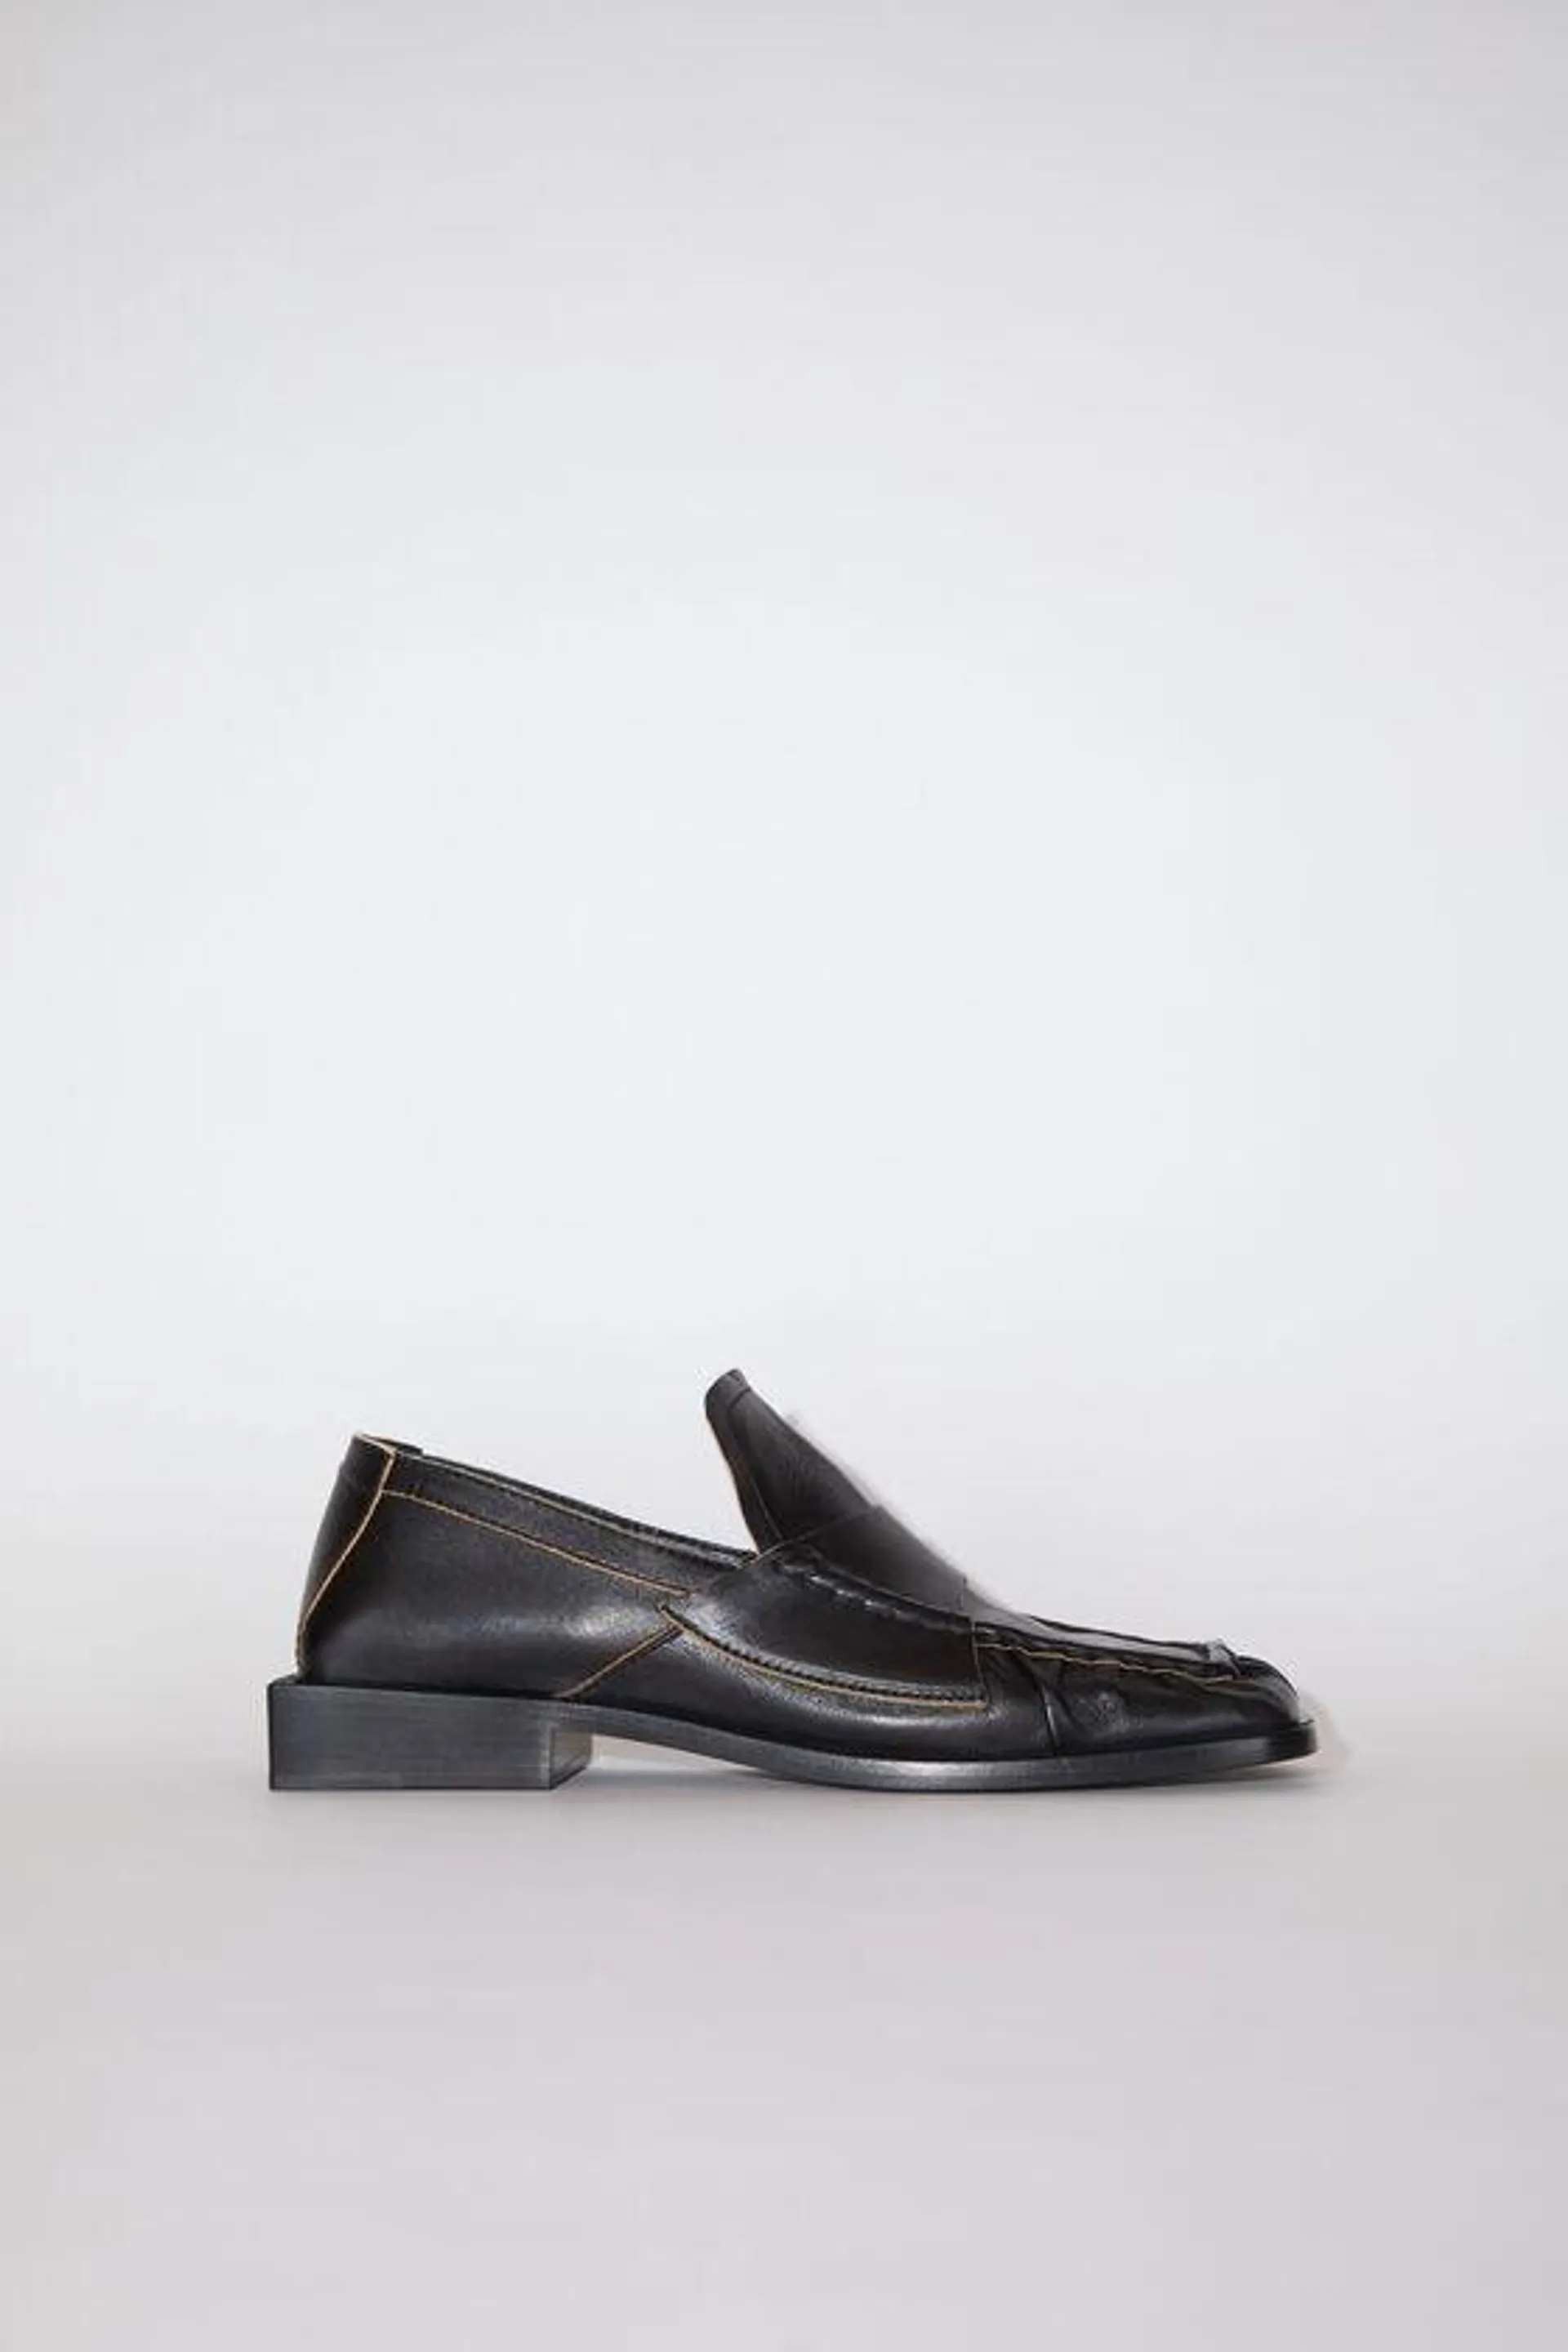 Square Toe Loafers